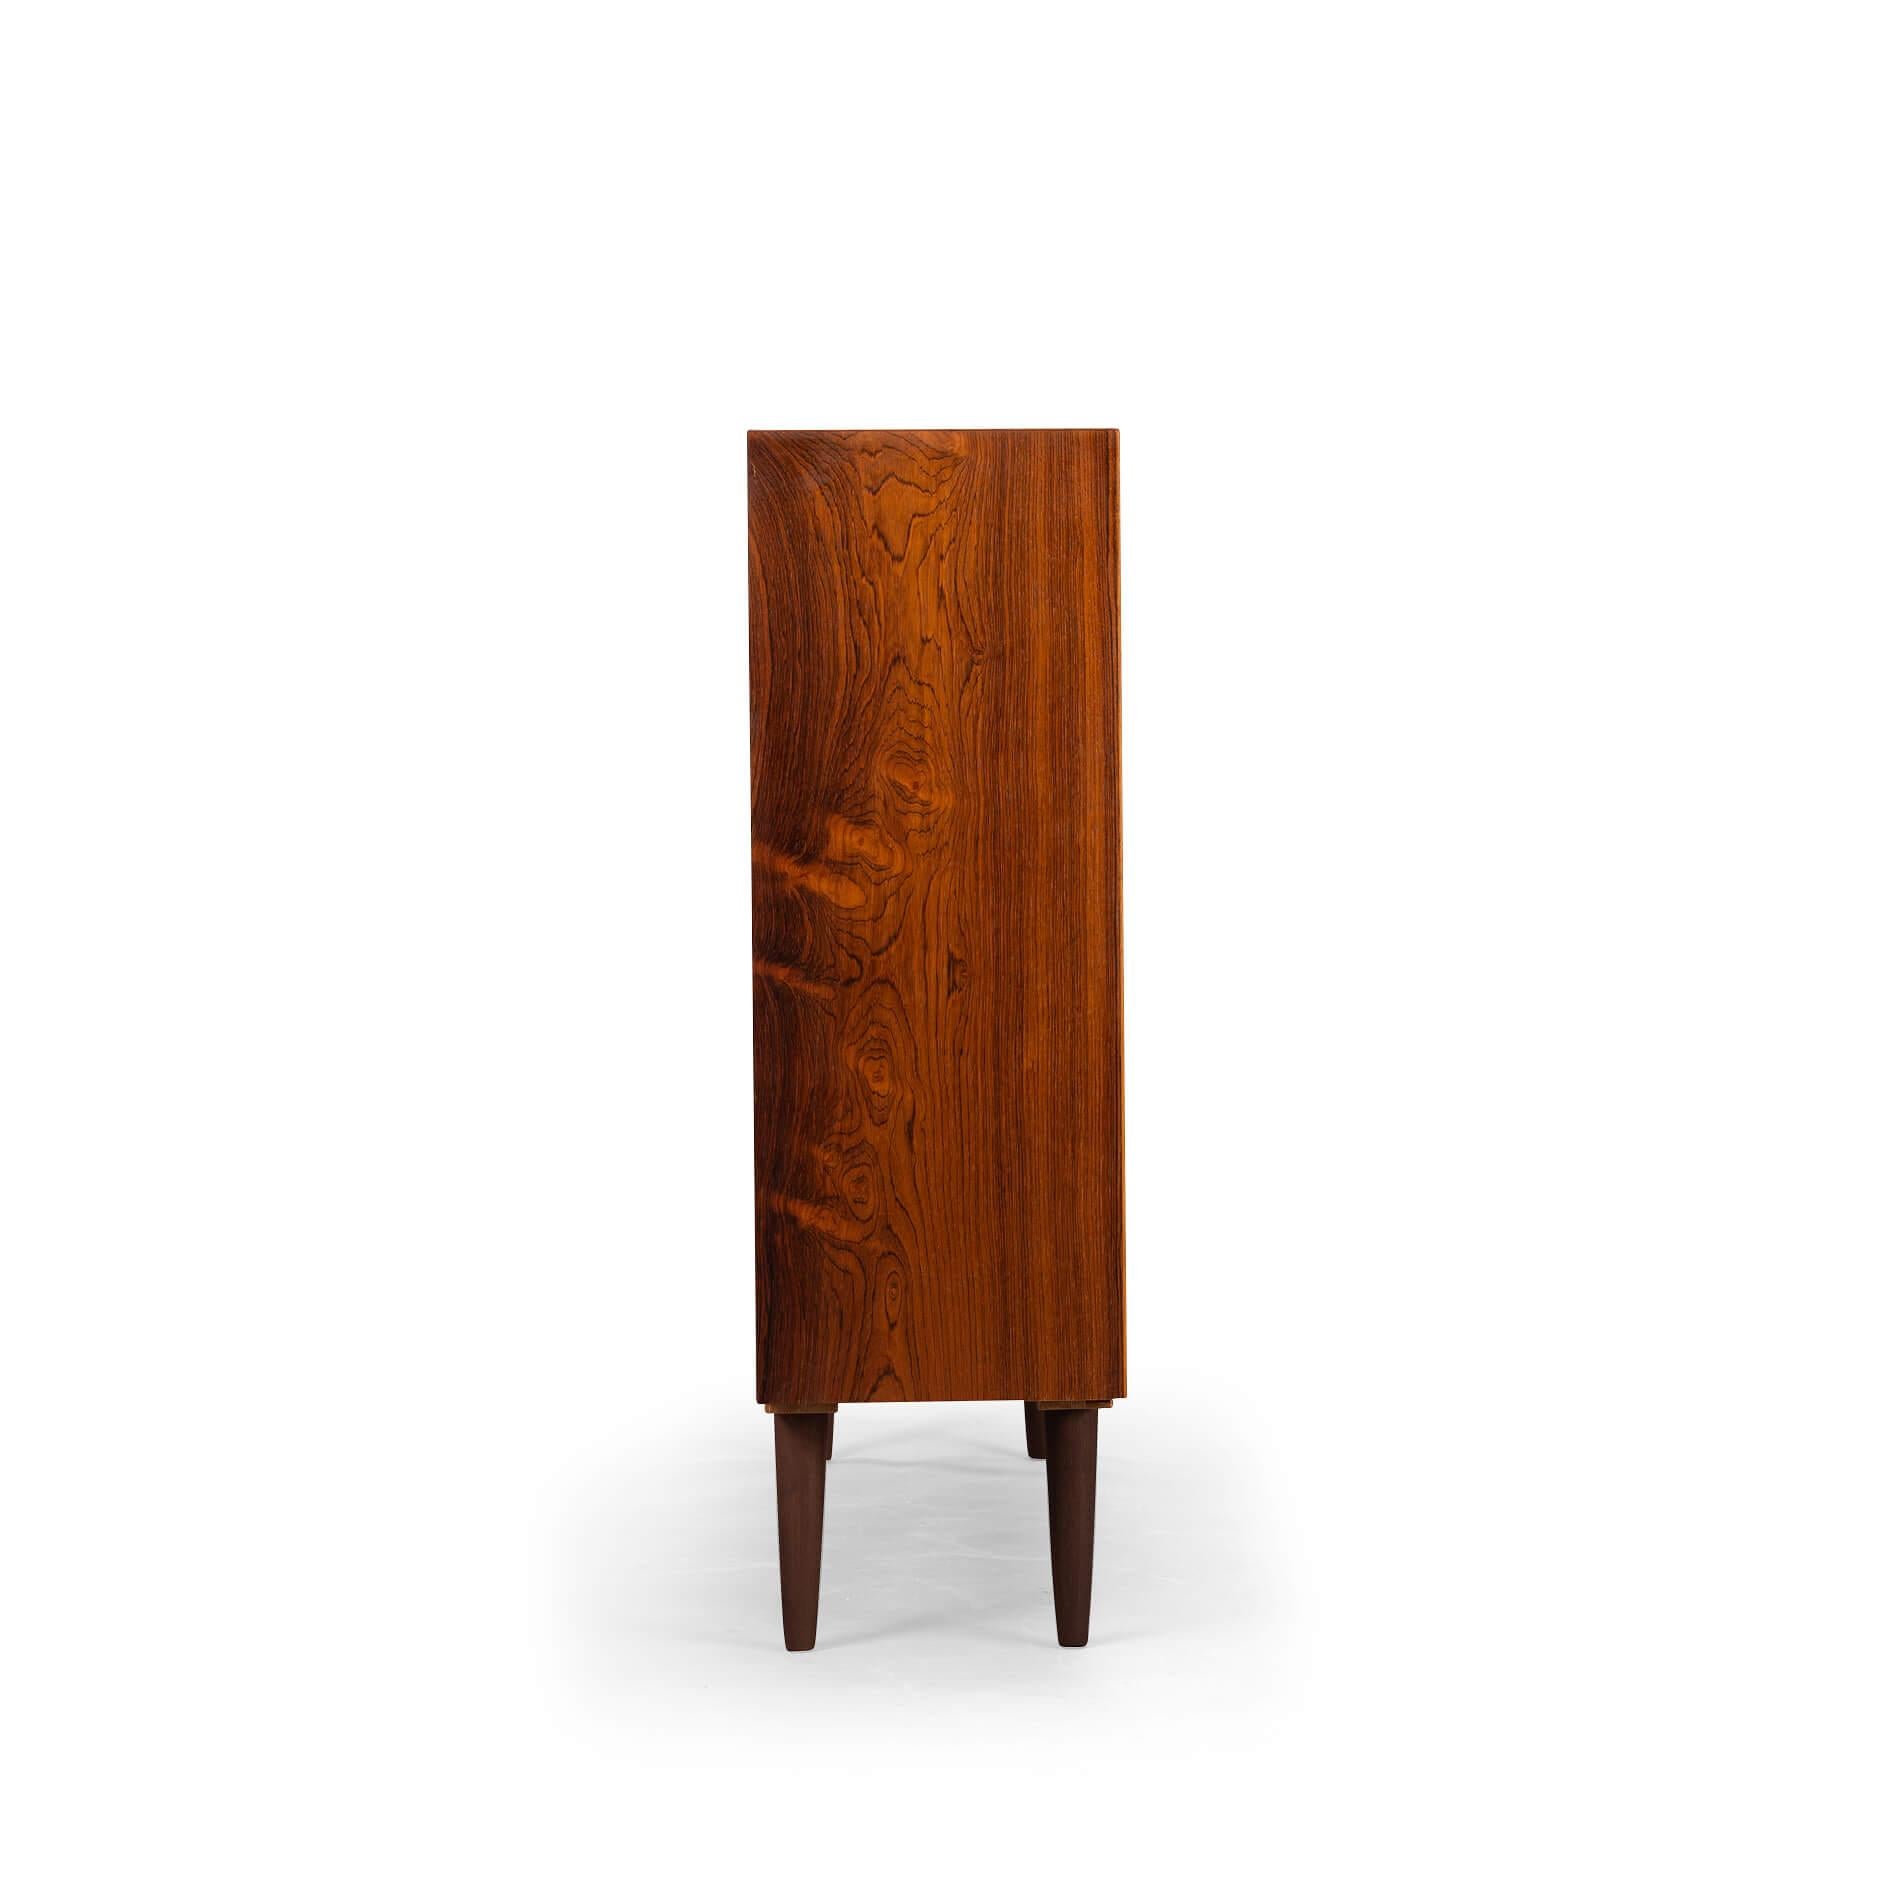 Danish tall bookcase in beautiful rosewood veneer. Designed by Carlo Jensen and made by Hundevad & Co.

This bookcase is in very good vintage condition and has a total of 4 height-adjustable shelves.
